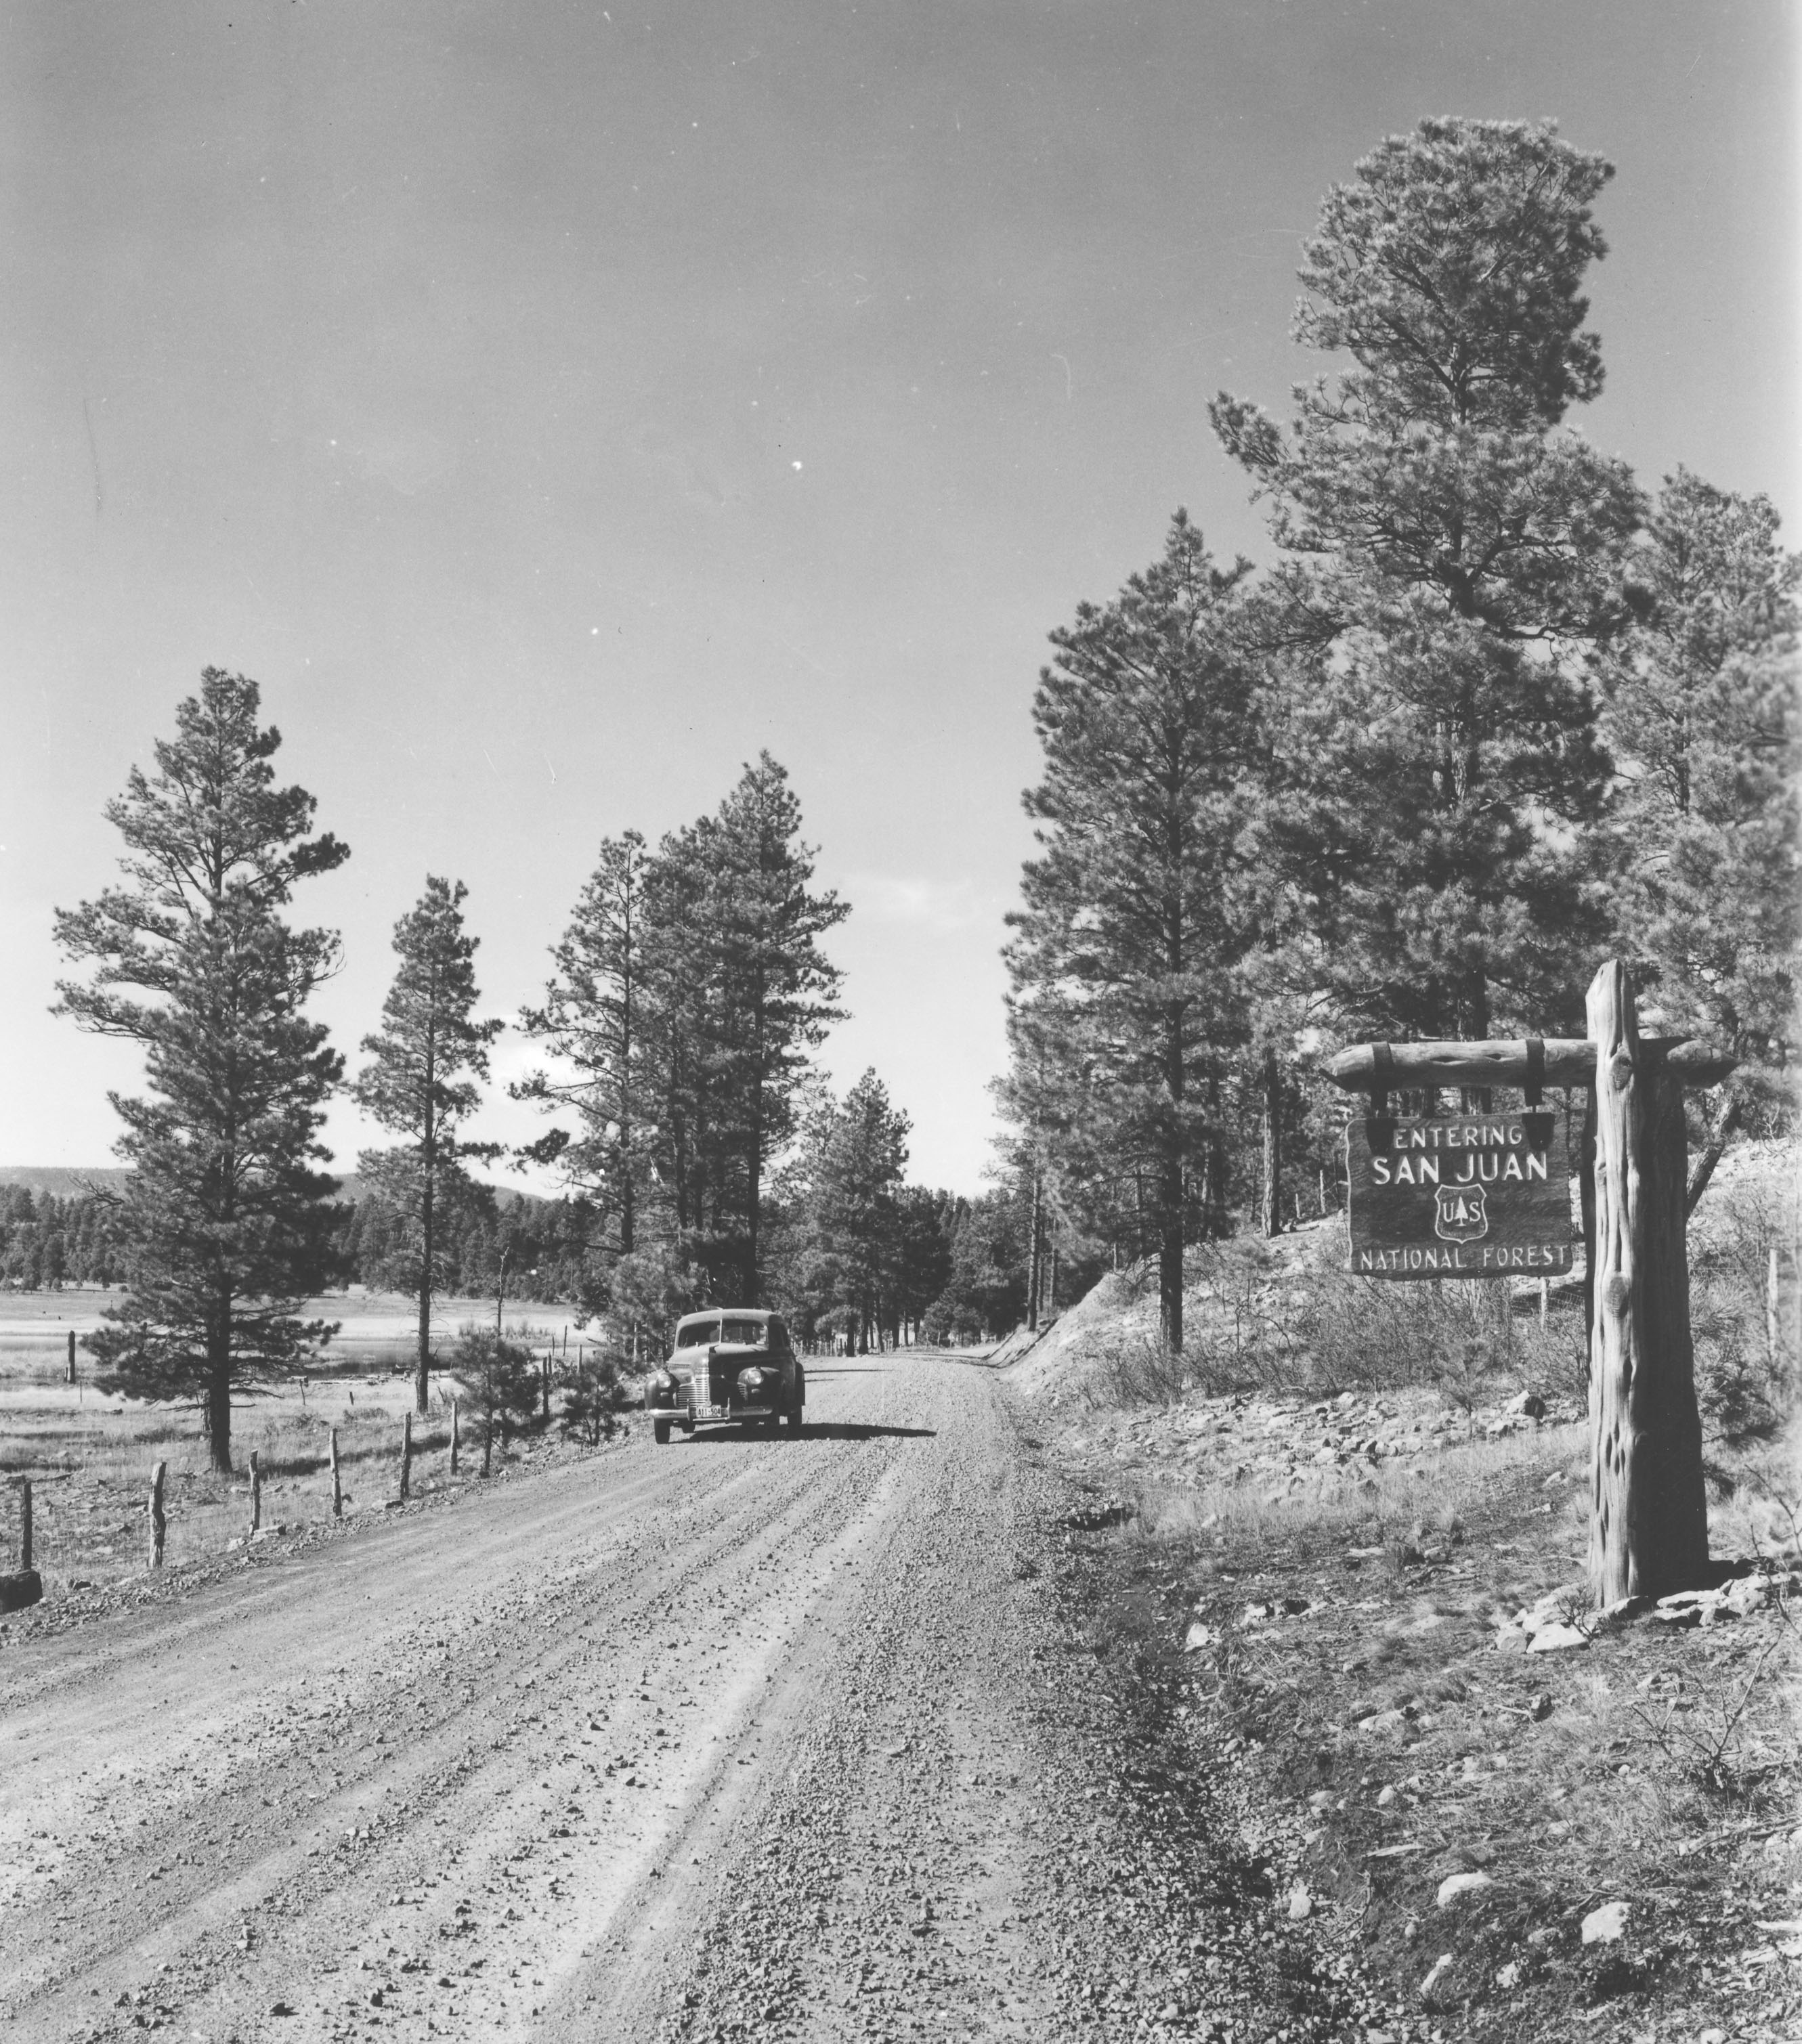 Thumbnail for 'San Juan National Forest, United States Forest Service Historic Records Collection'